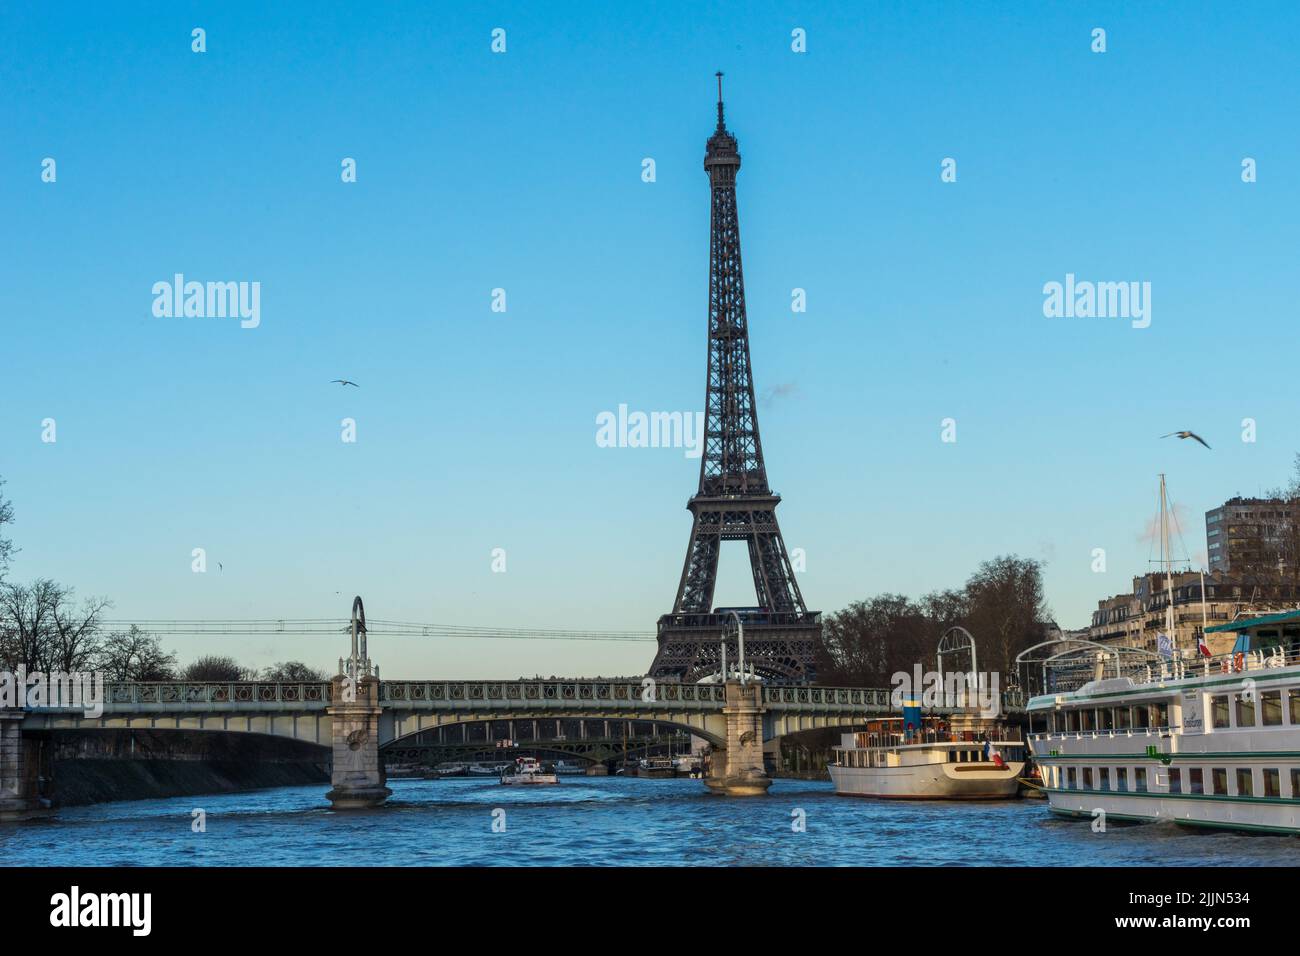 A view of the enchanting Eiffel Tower in the daytime in Paris. Stock Photo